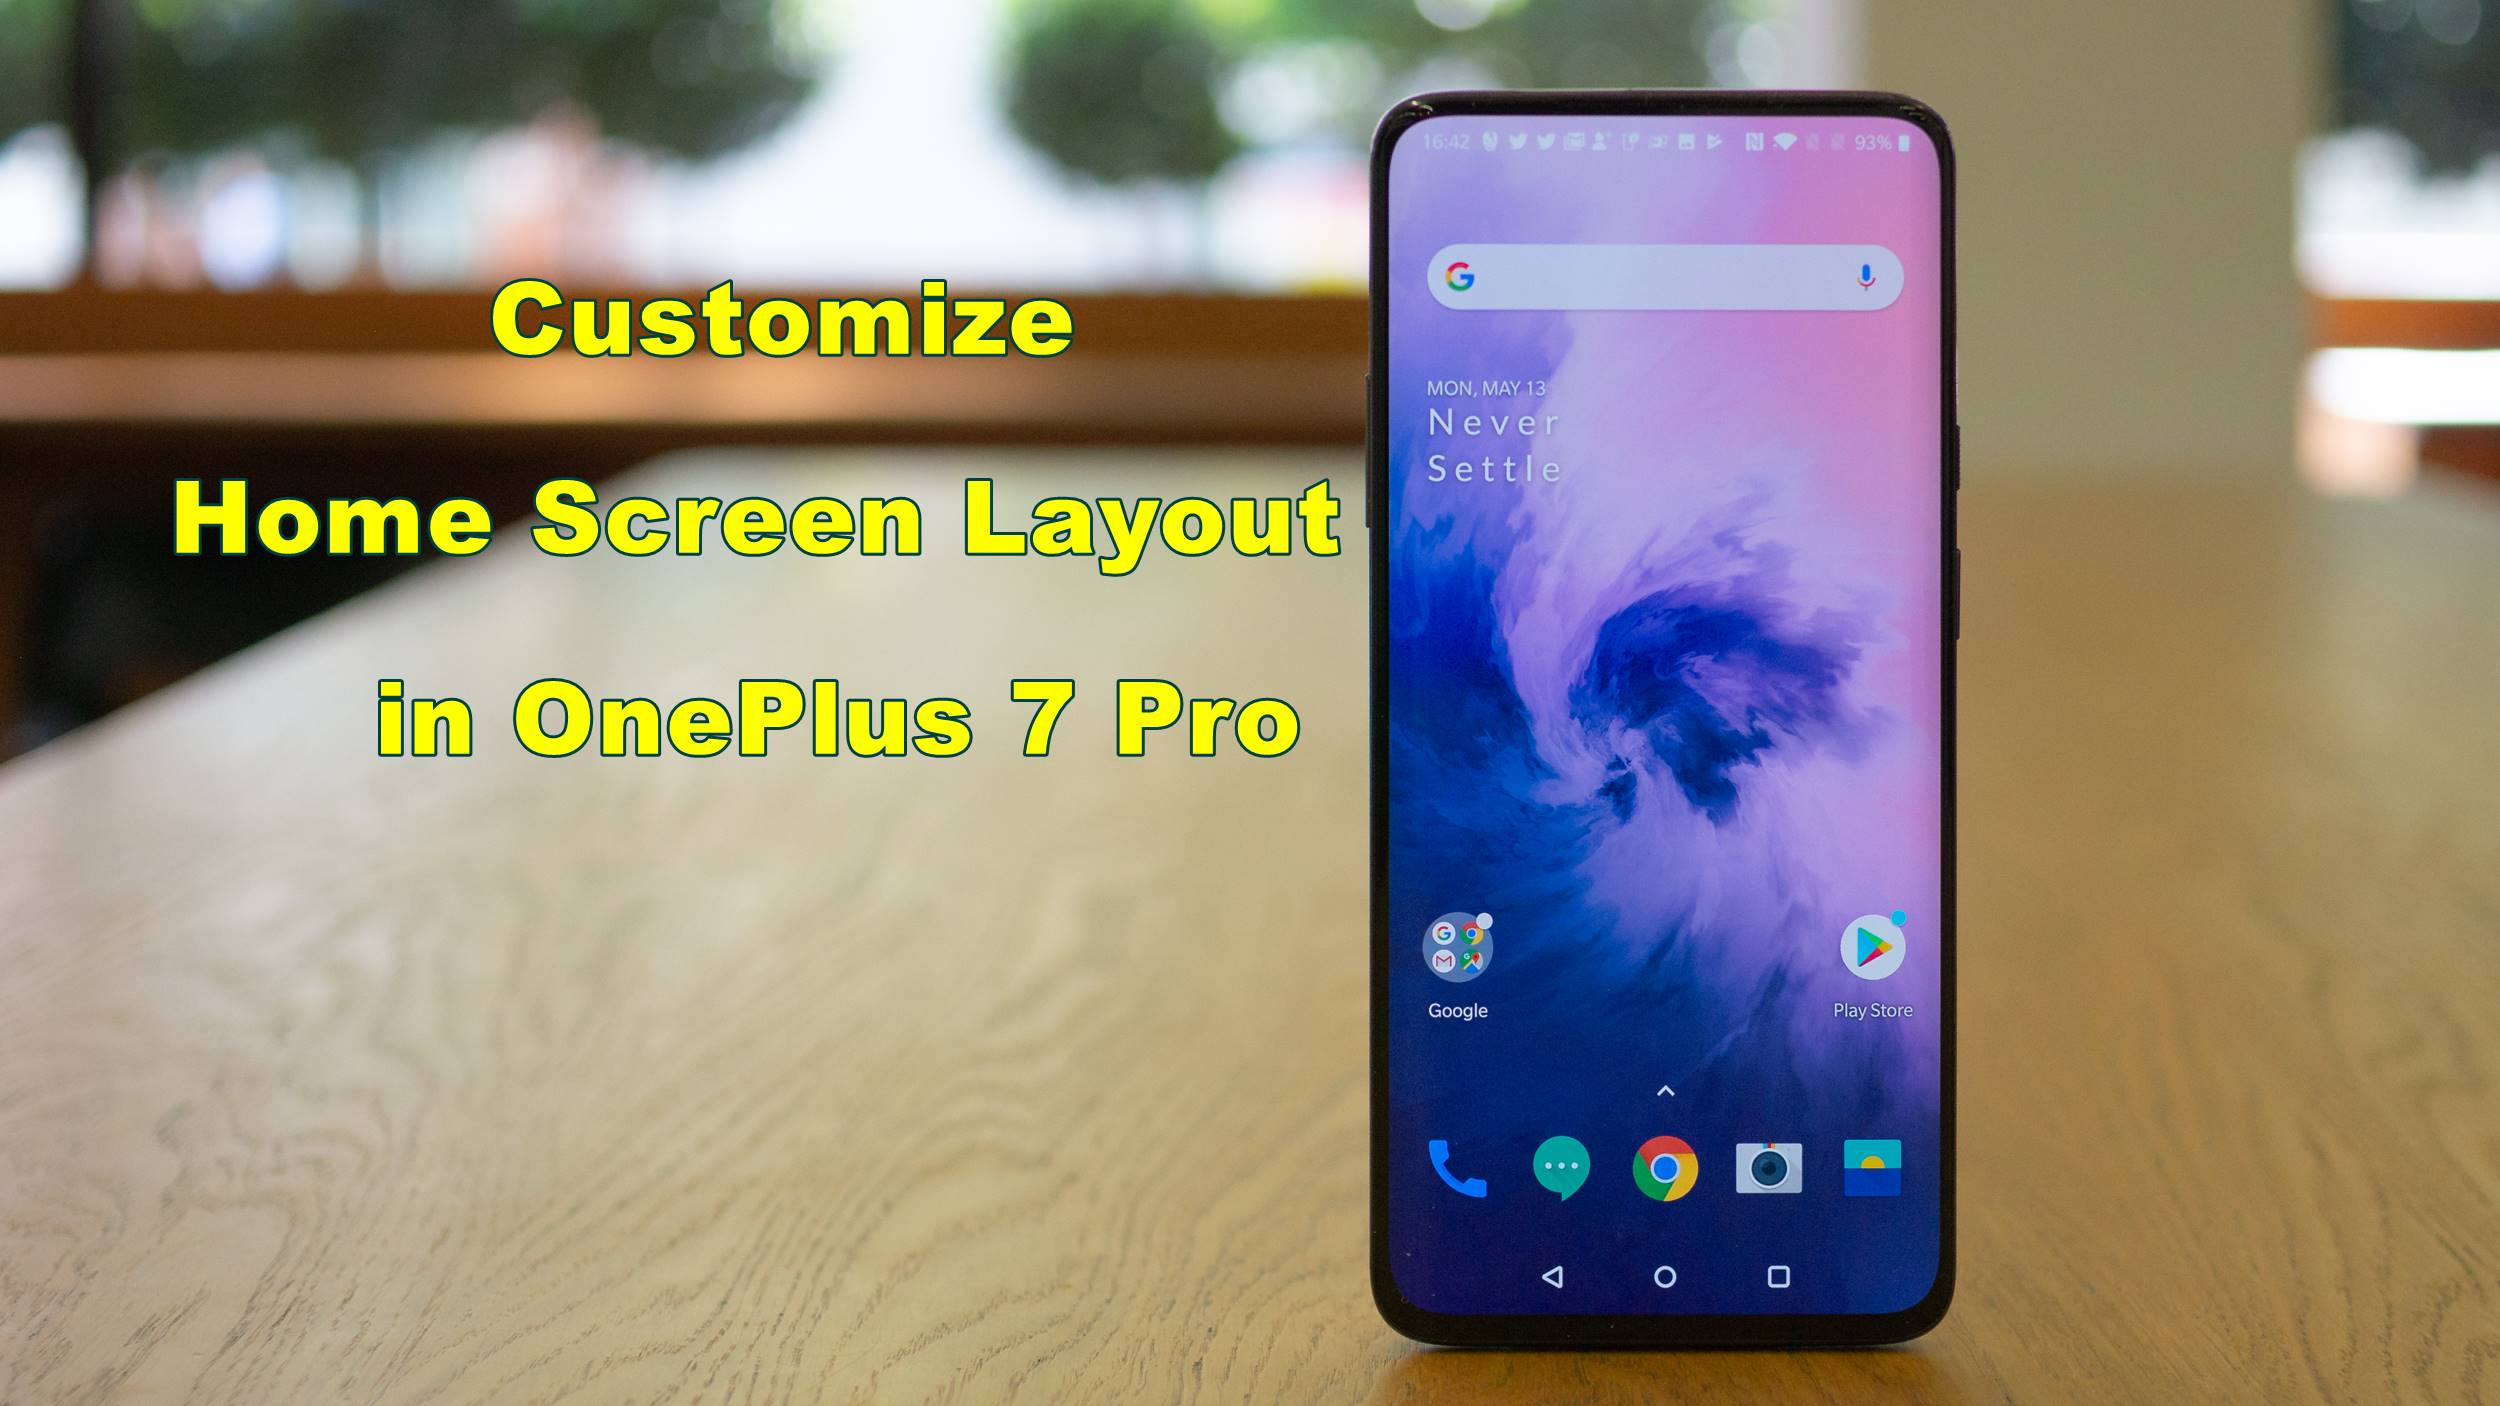 How to change/customize the Home Screen Layout in OnePlus 7 Pro